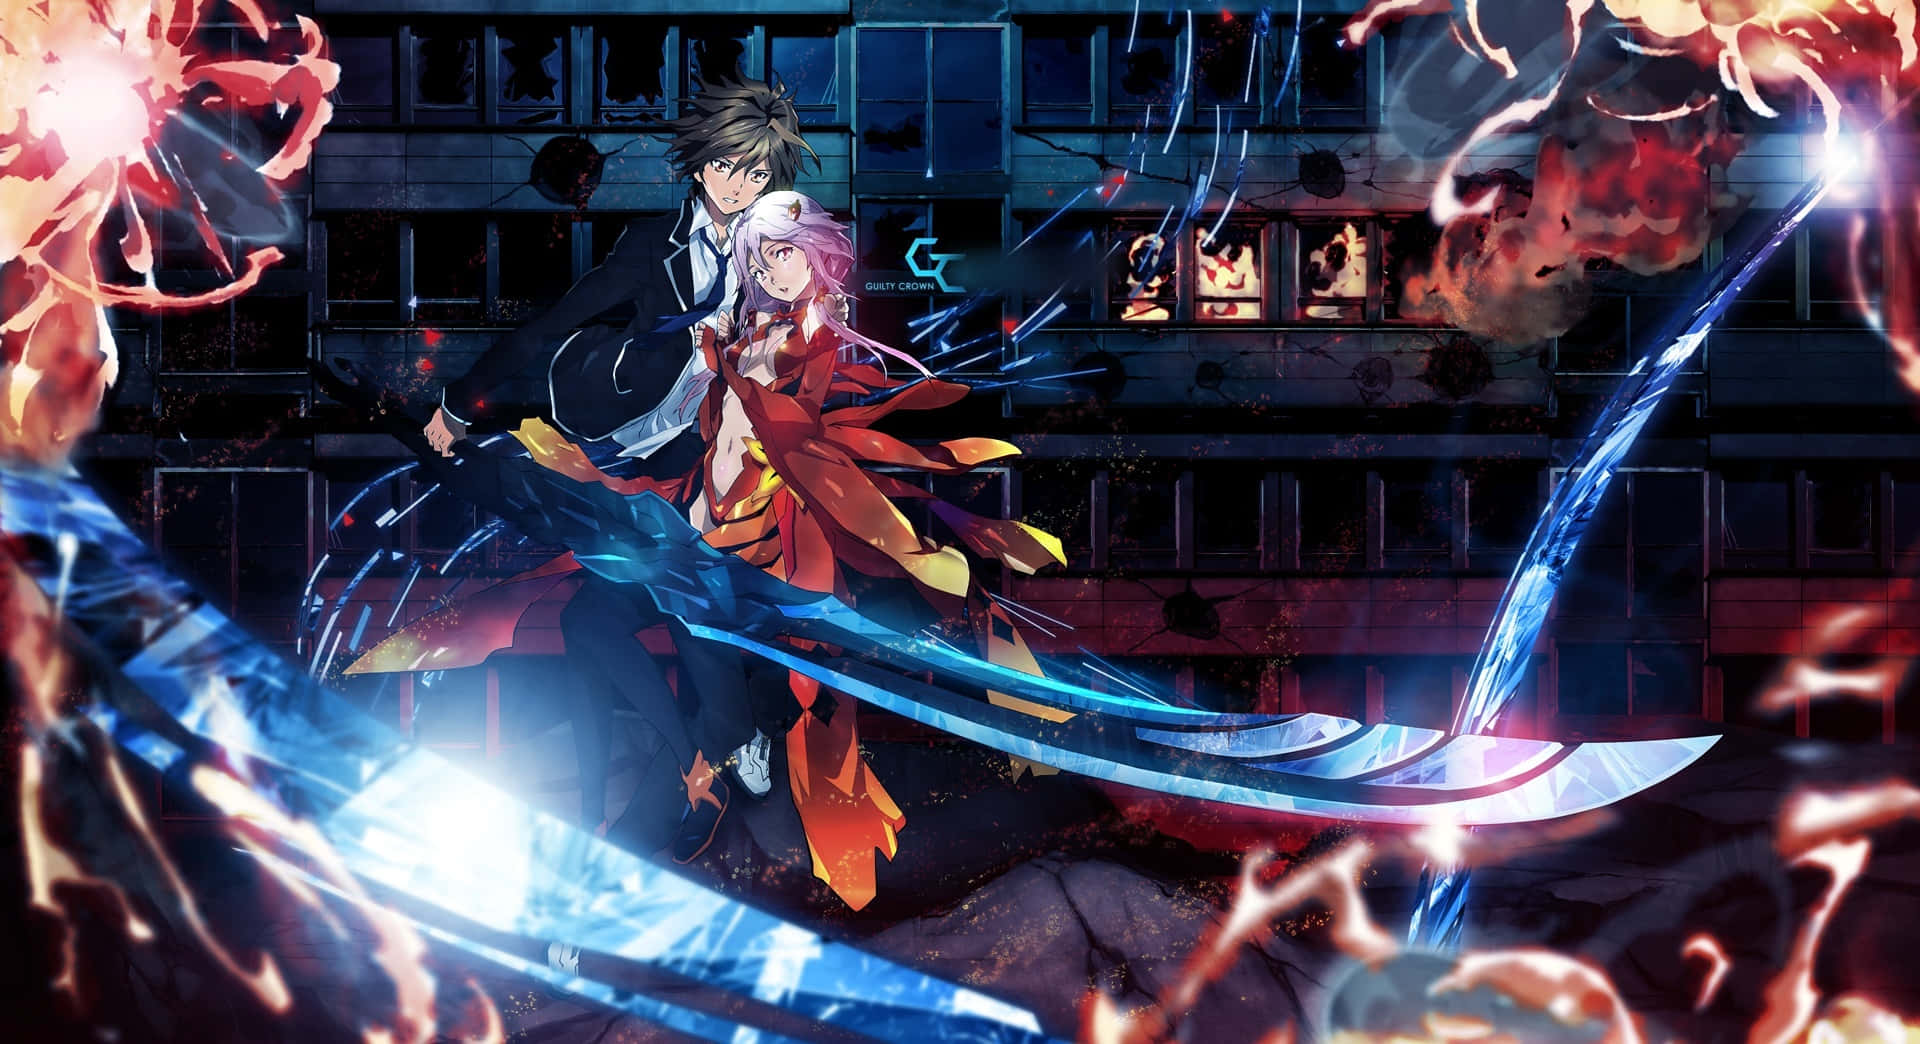 The Righteous Path of Shu Ouma in Guilty Crown